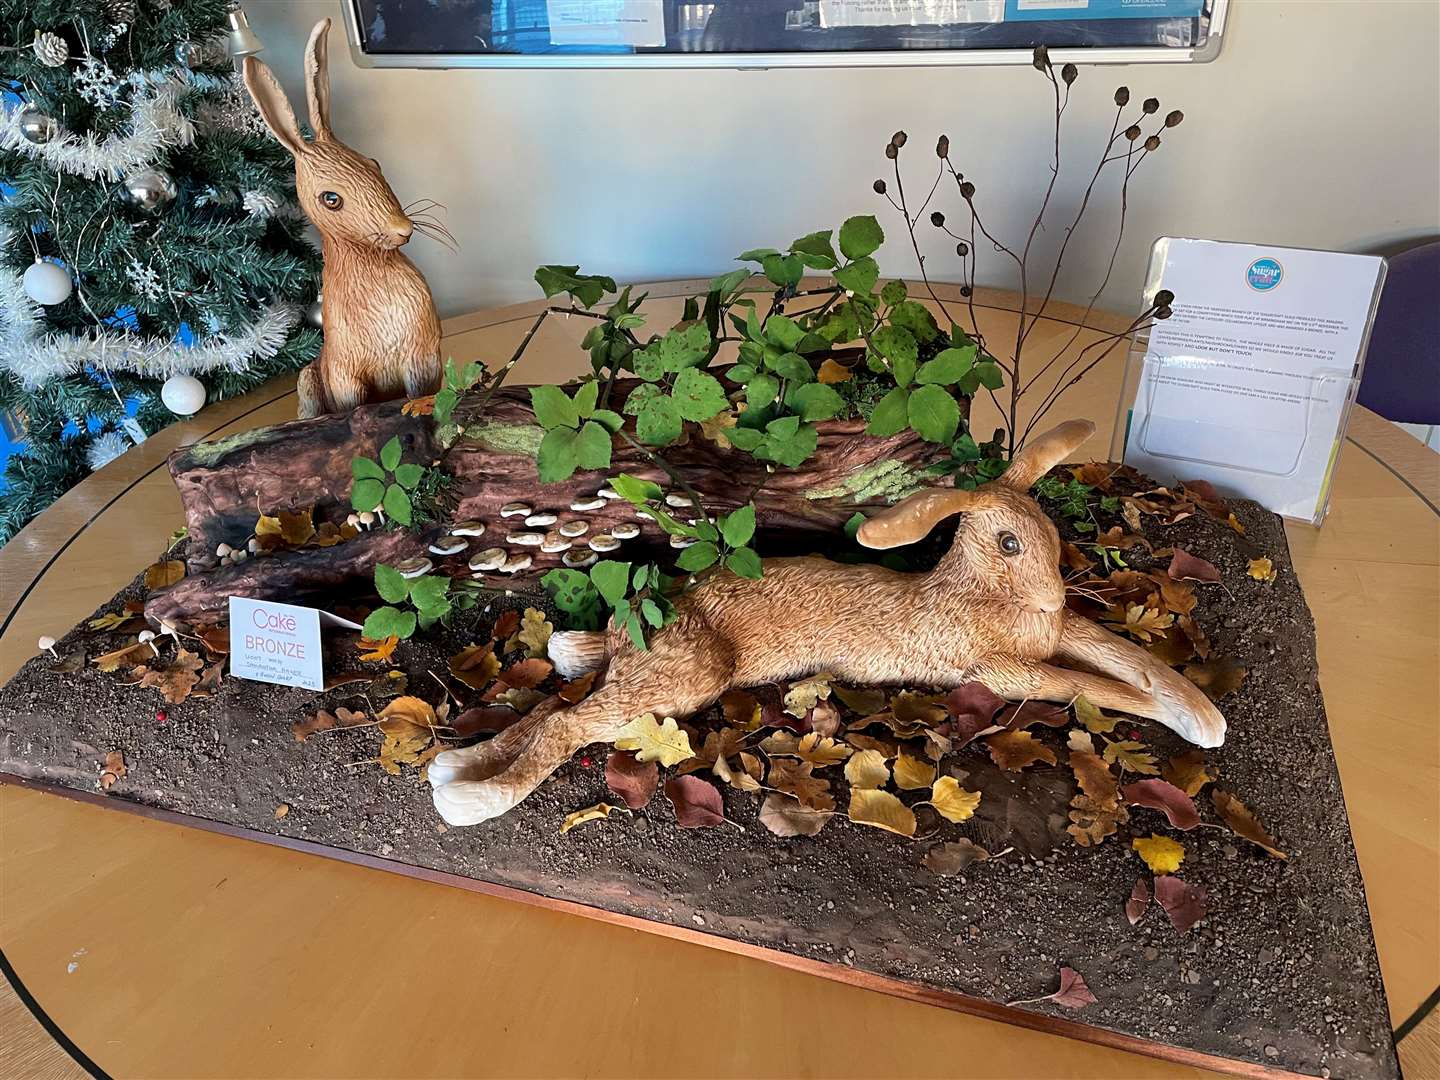 The 4ft by 2ft woodland scene has been created out of sugar